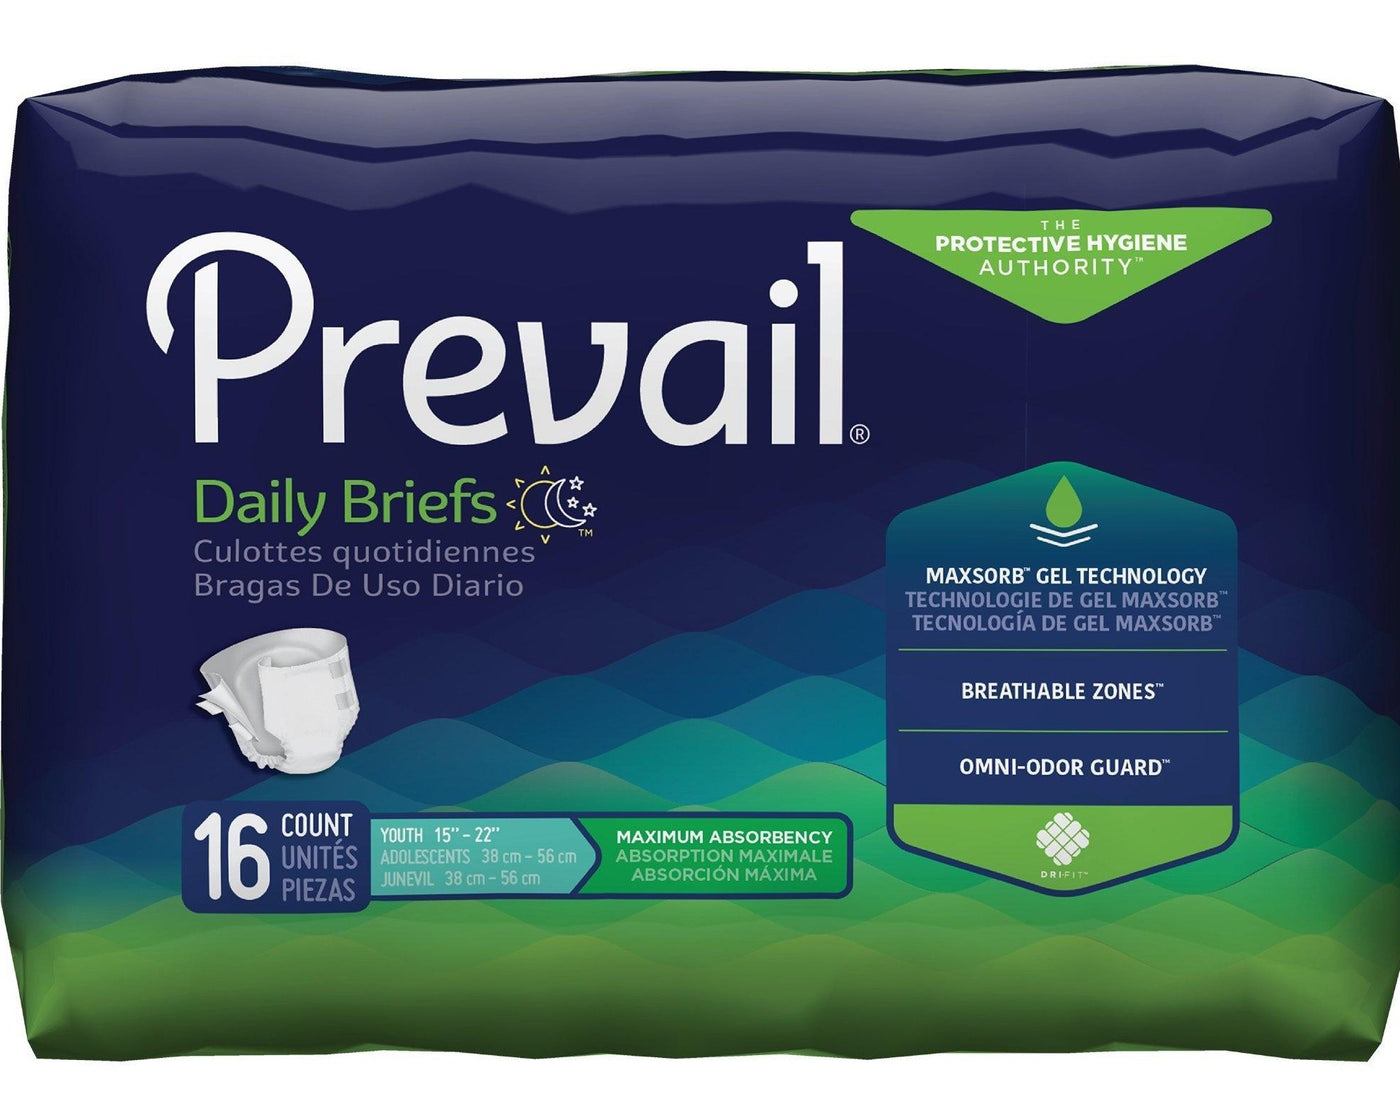 Adult diapers for incontinence for big kids - Prevail Youth / Small Size  Briefs fit smallest wearers –